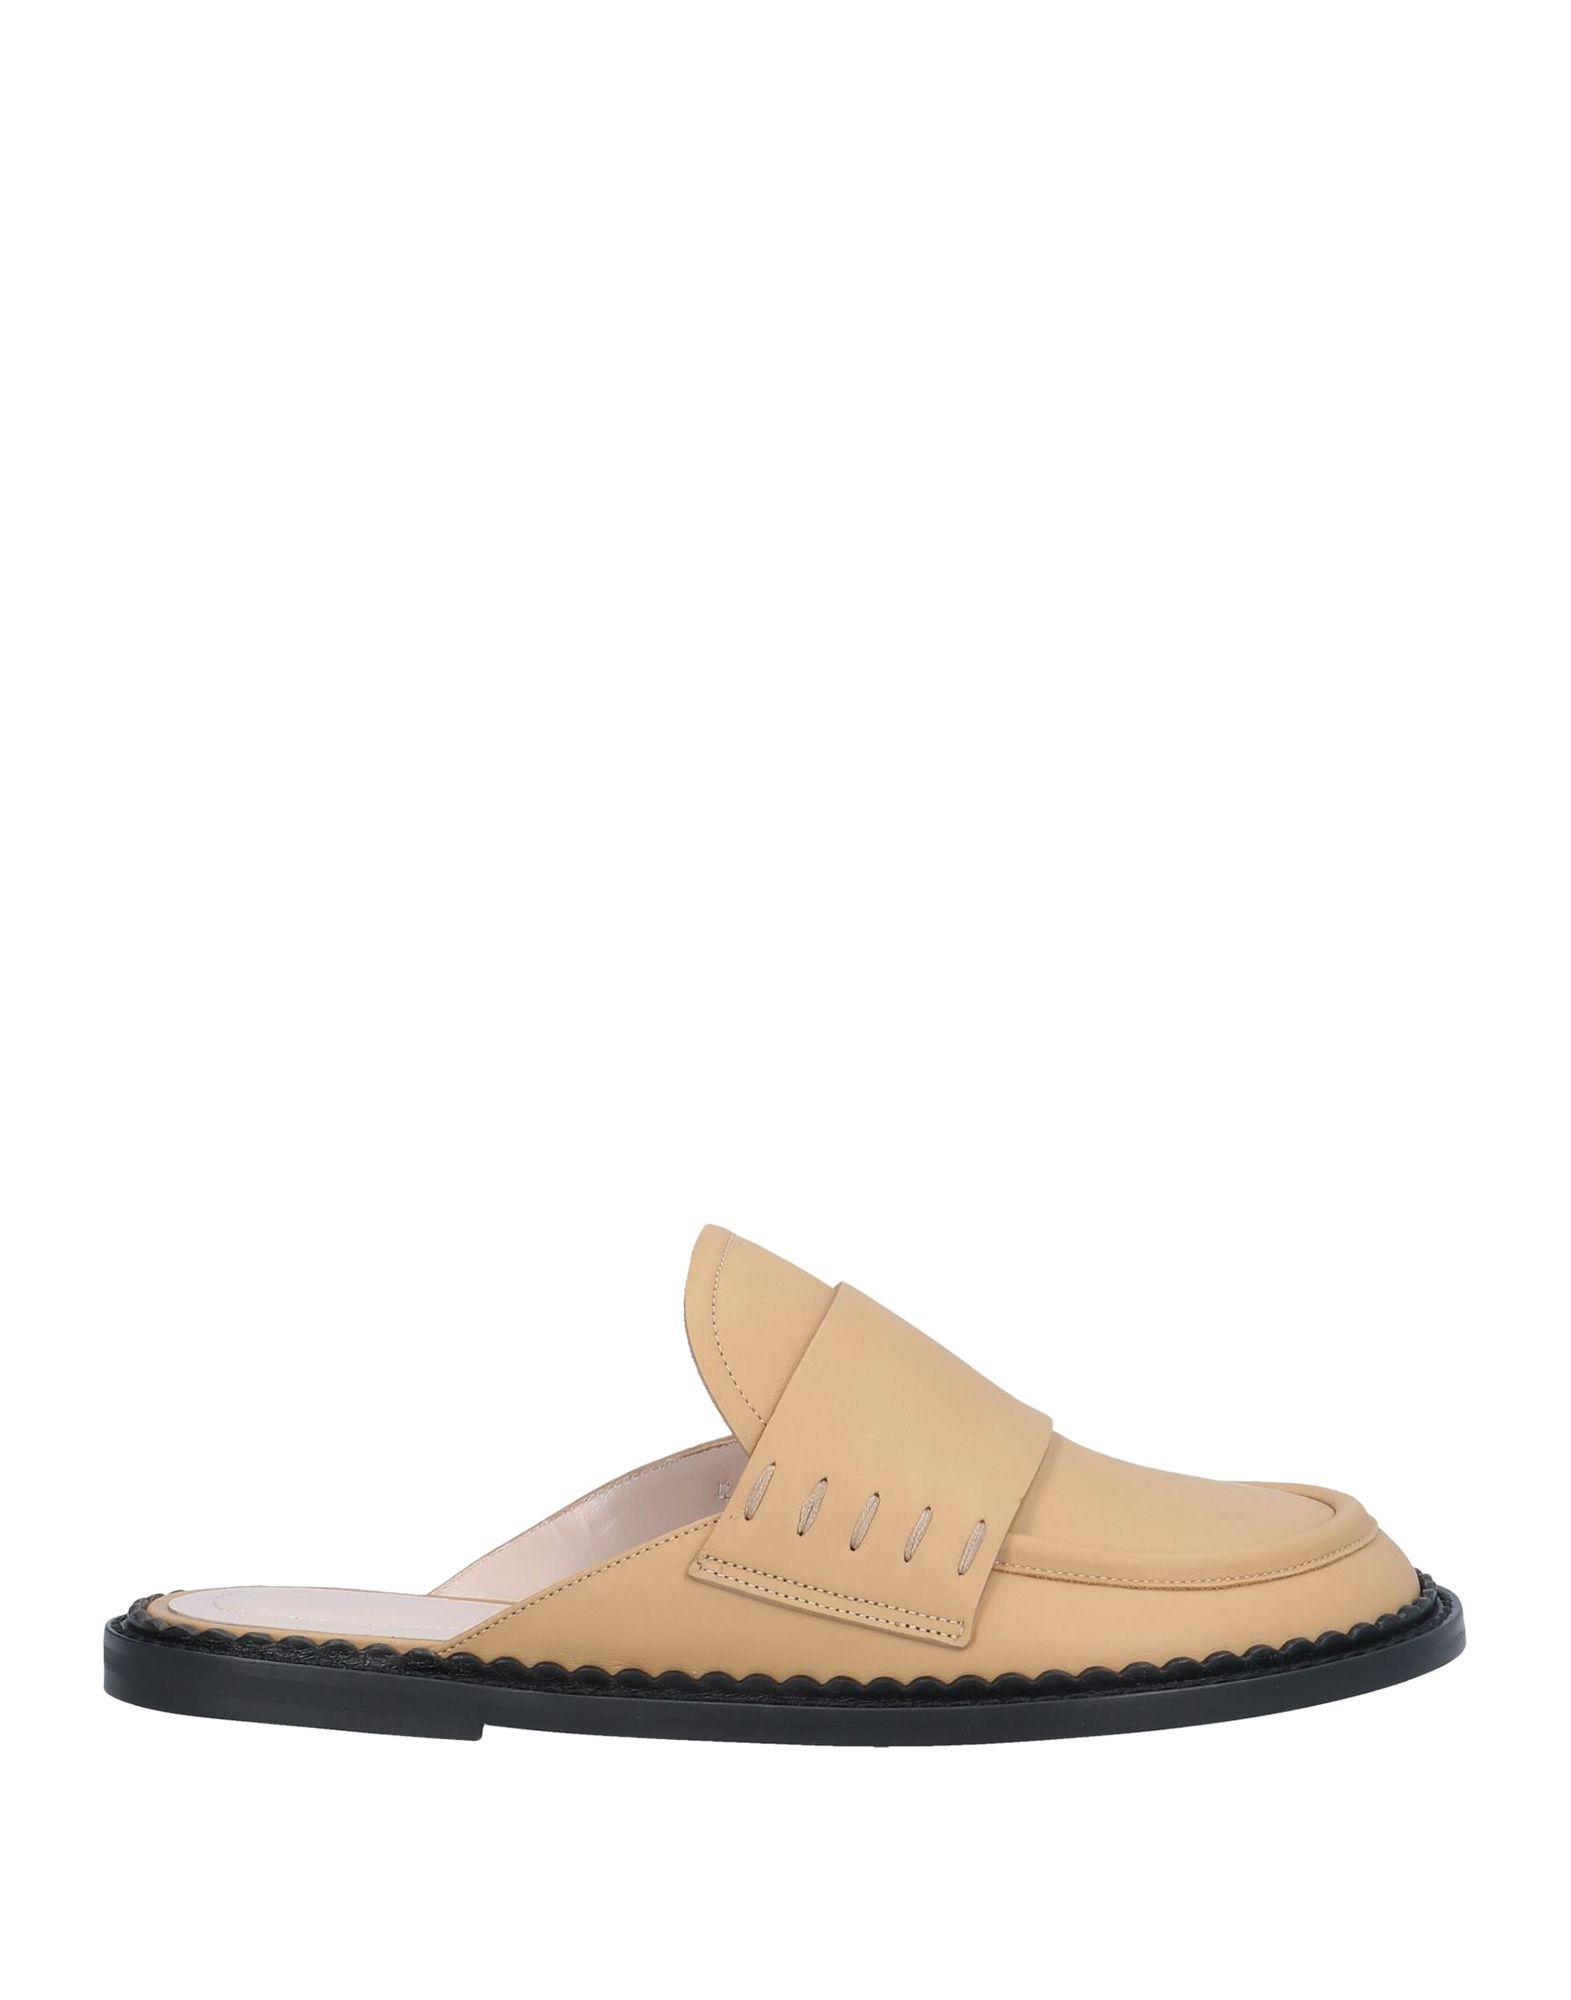 Marni Leather Mules in Beige (Natural) - Lyst